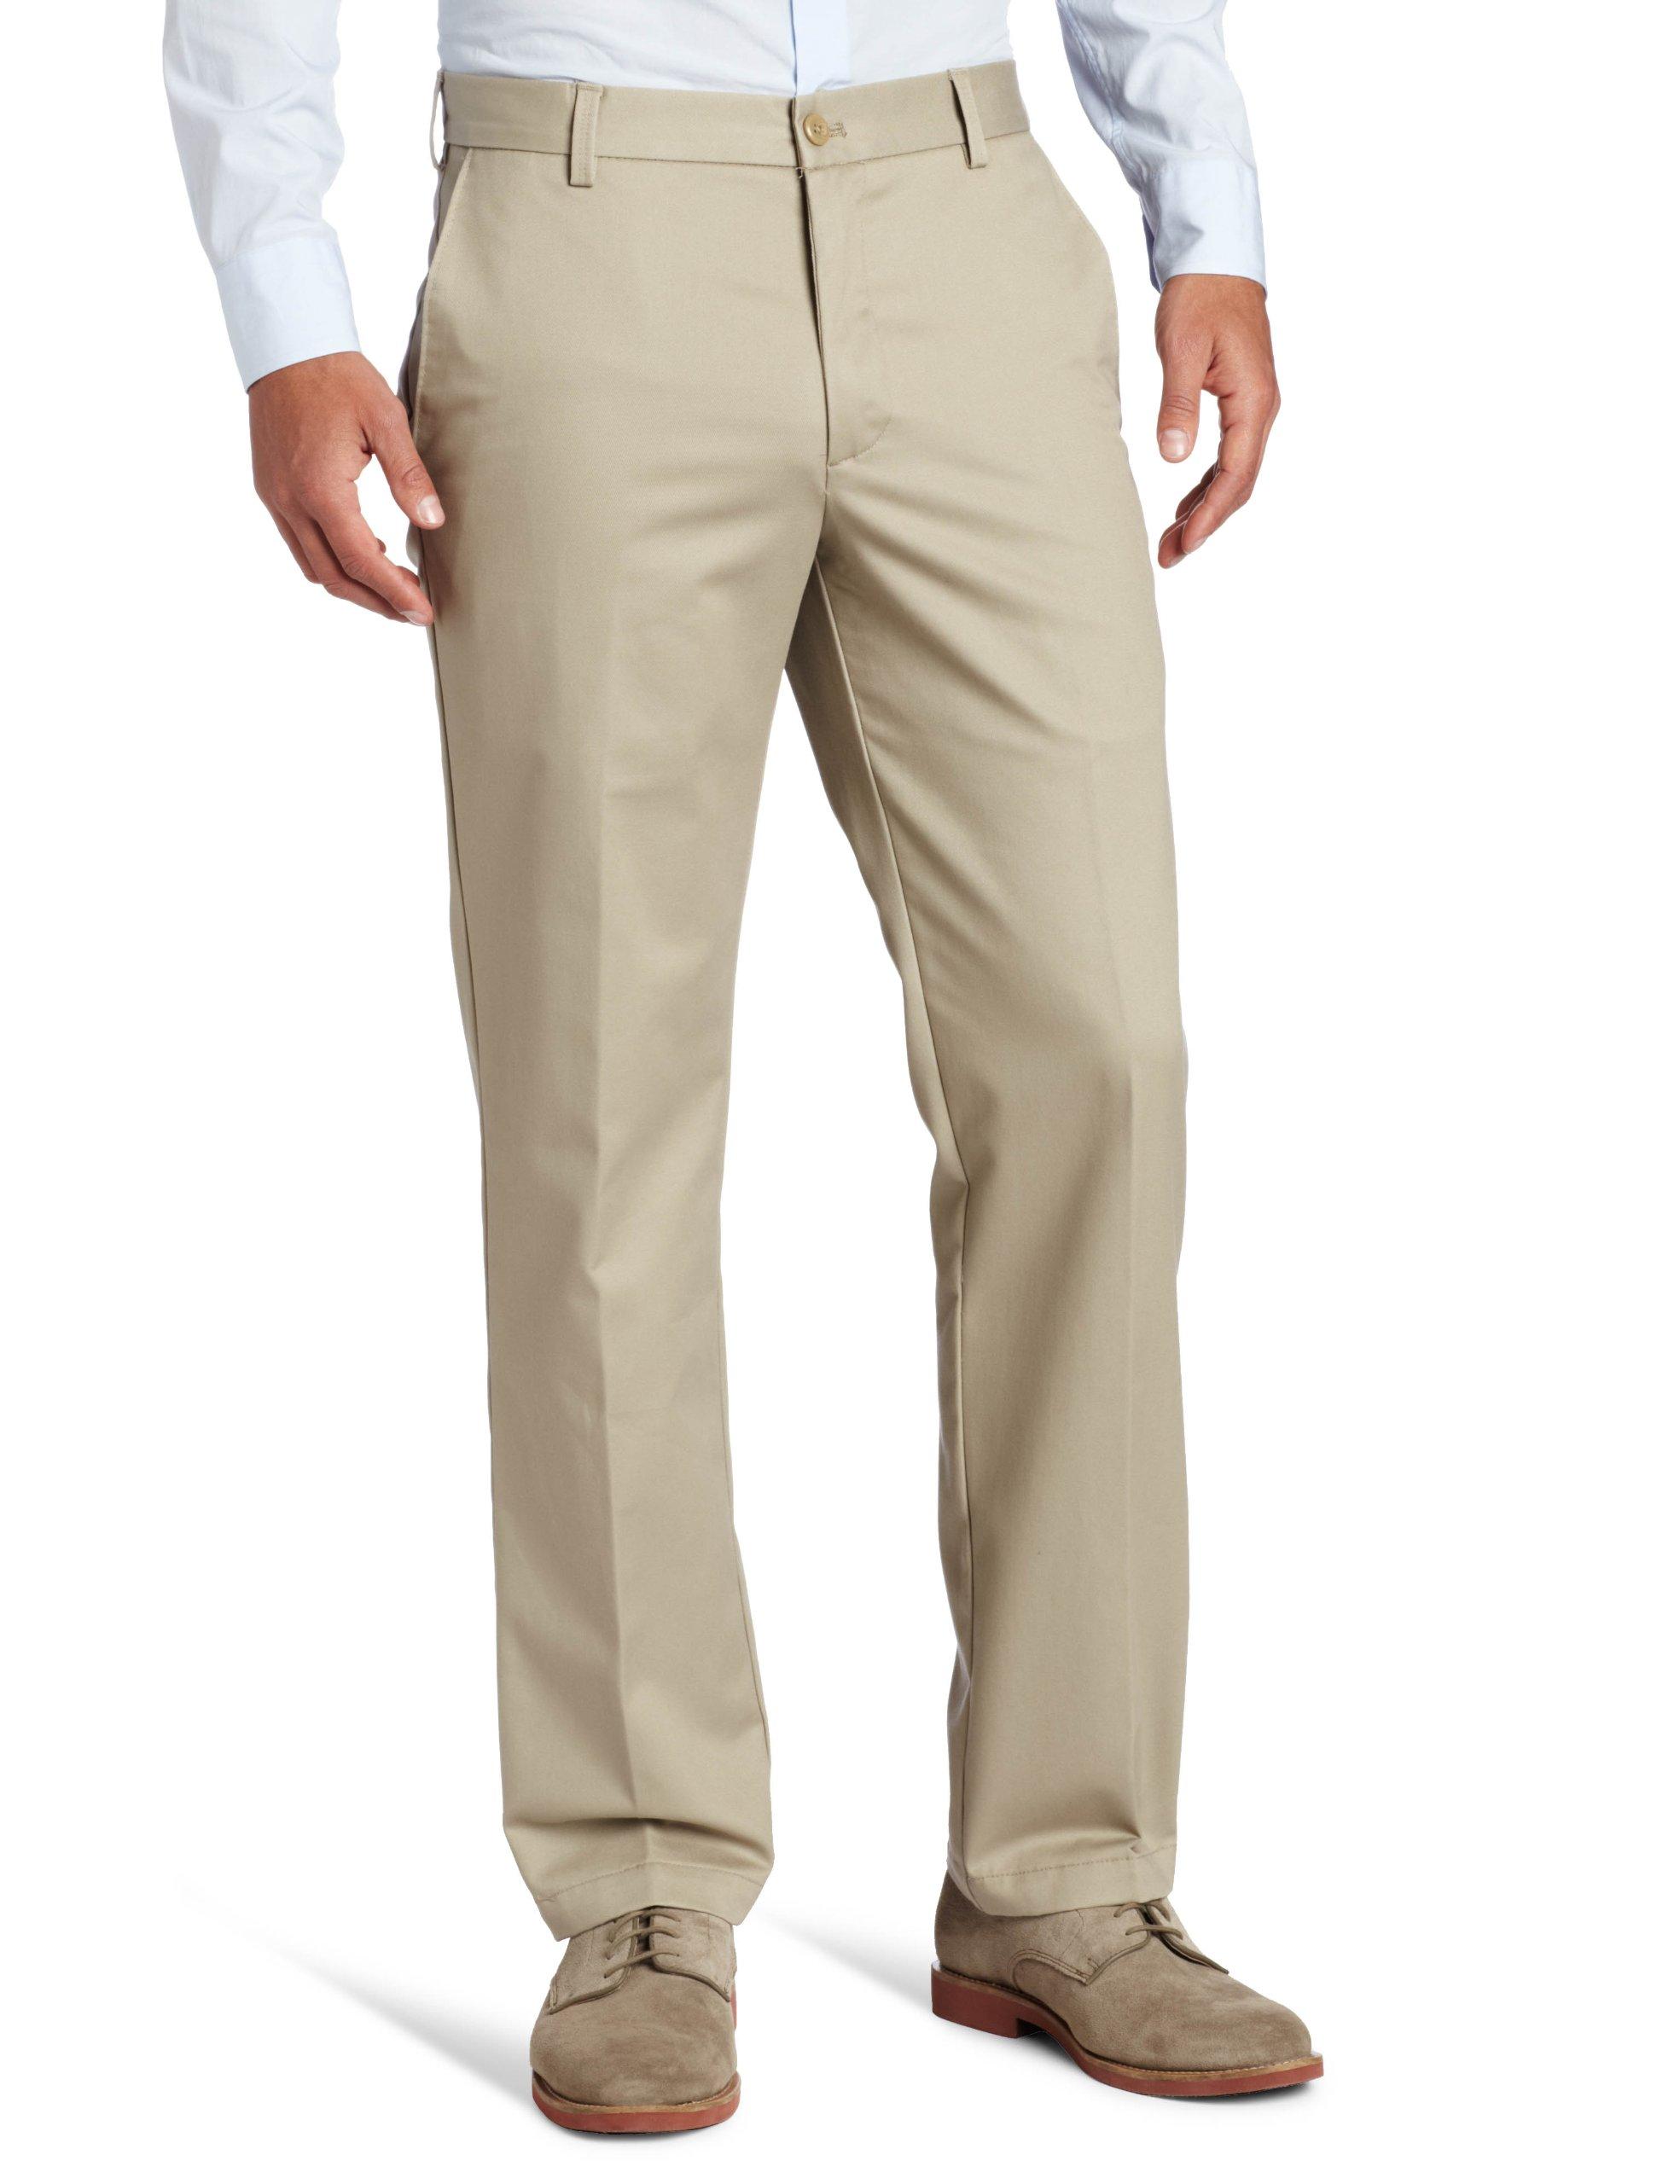 Izod Cotton American Chino Flat Front Classic Fit Pant in Khaki ...